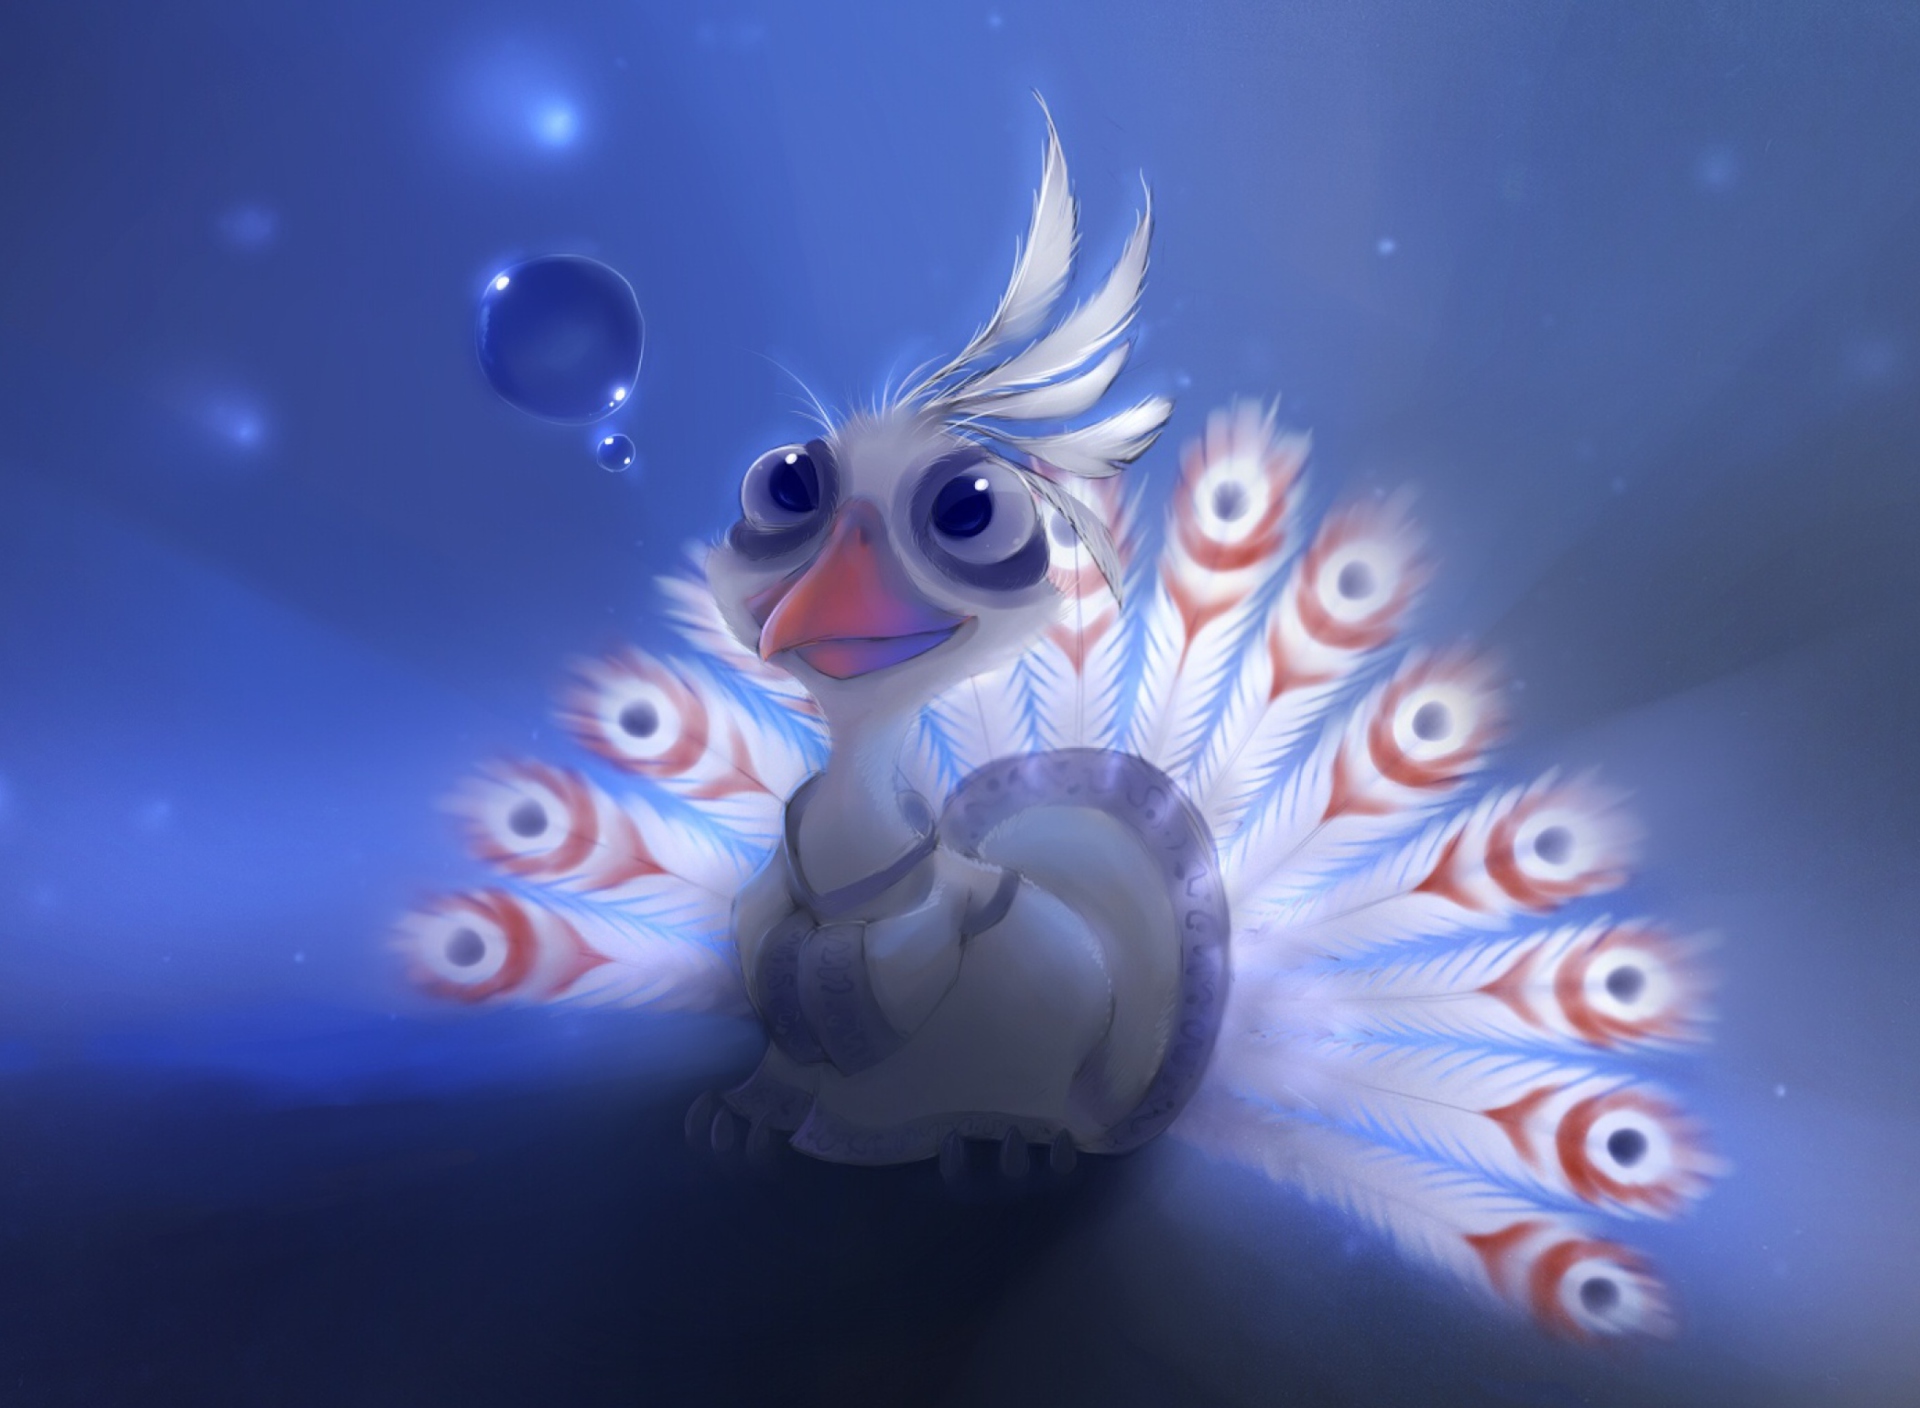 White Peacock Painting wallpaper 1920x1408